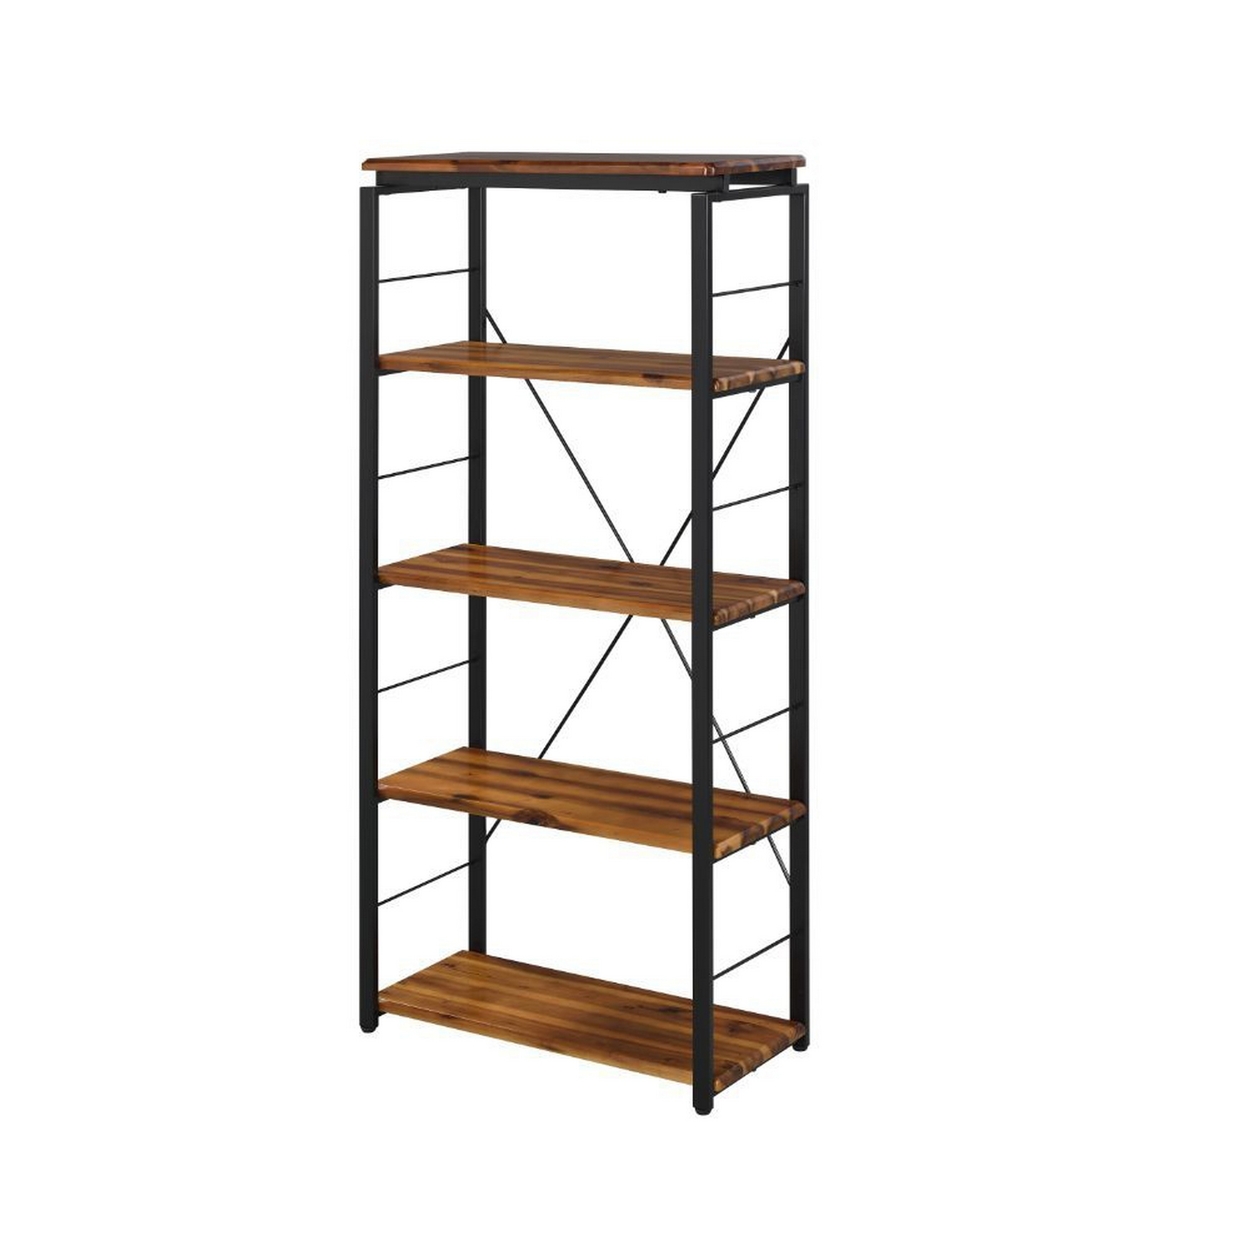 Industrial Bookshelf With 4 Shelves And Open Metal Frame, Brown And Black- Saltoro Sherpi